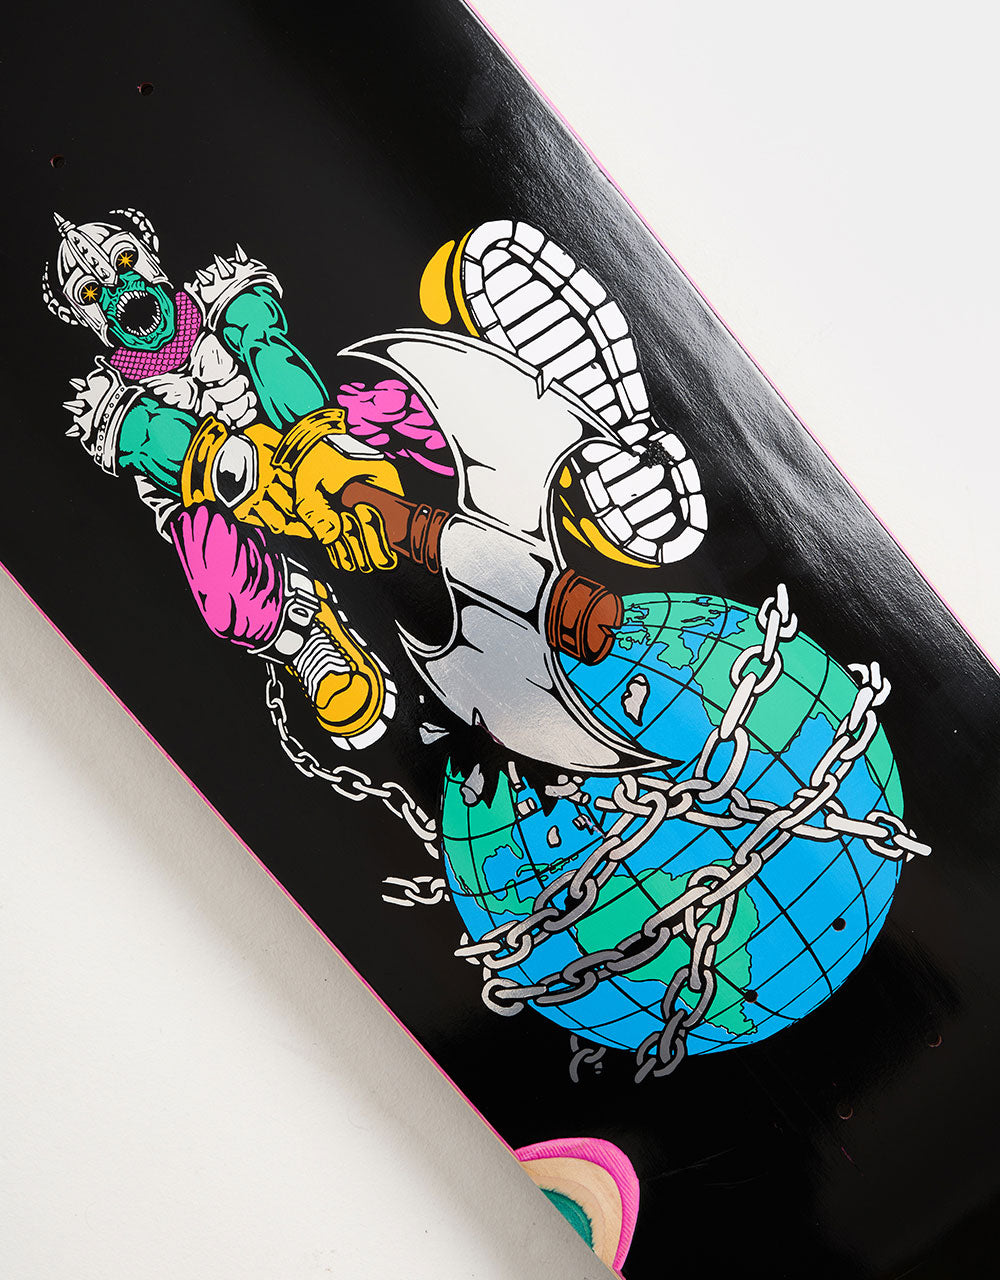 Welcome Unchained on Magic Bullet Skateboard Deck - 10.5"